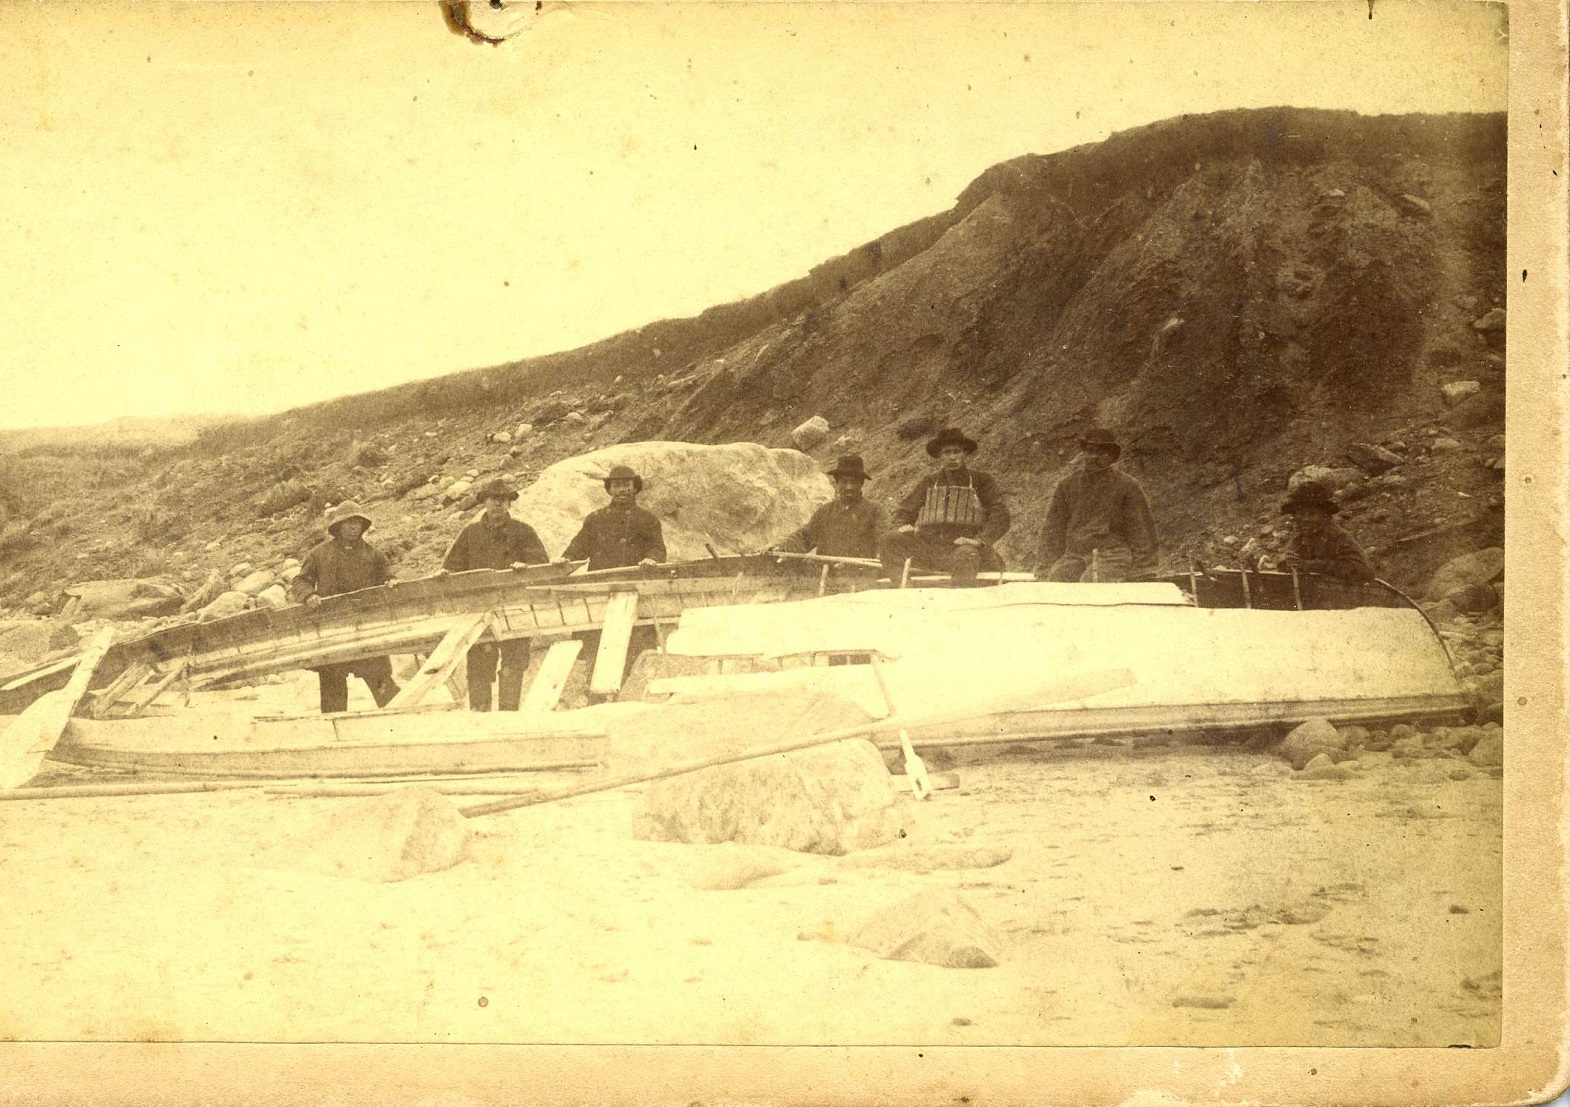 Aquinnah Wampanoag men stand with the demolished surfboat that had been launched into the breakers during the City of Columbus rescue (Courtesy of the Martha’s Vineyard Museum)